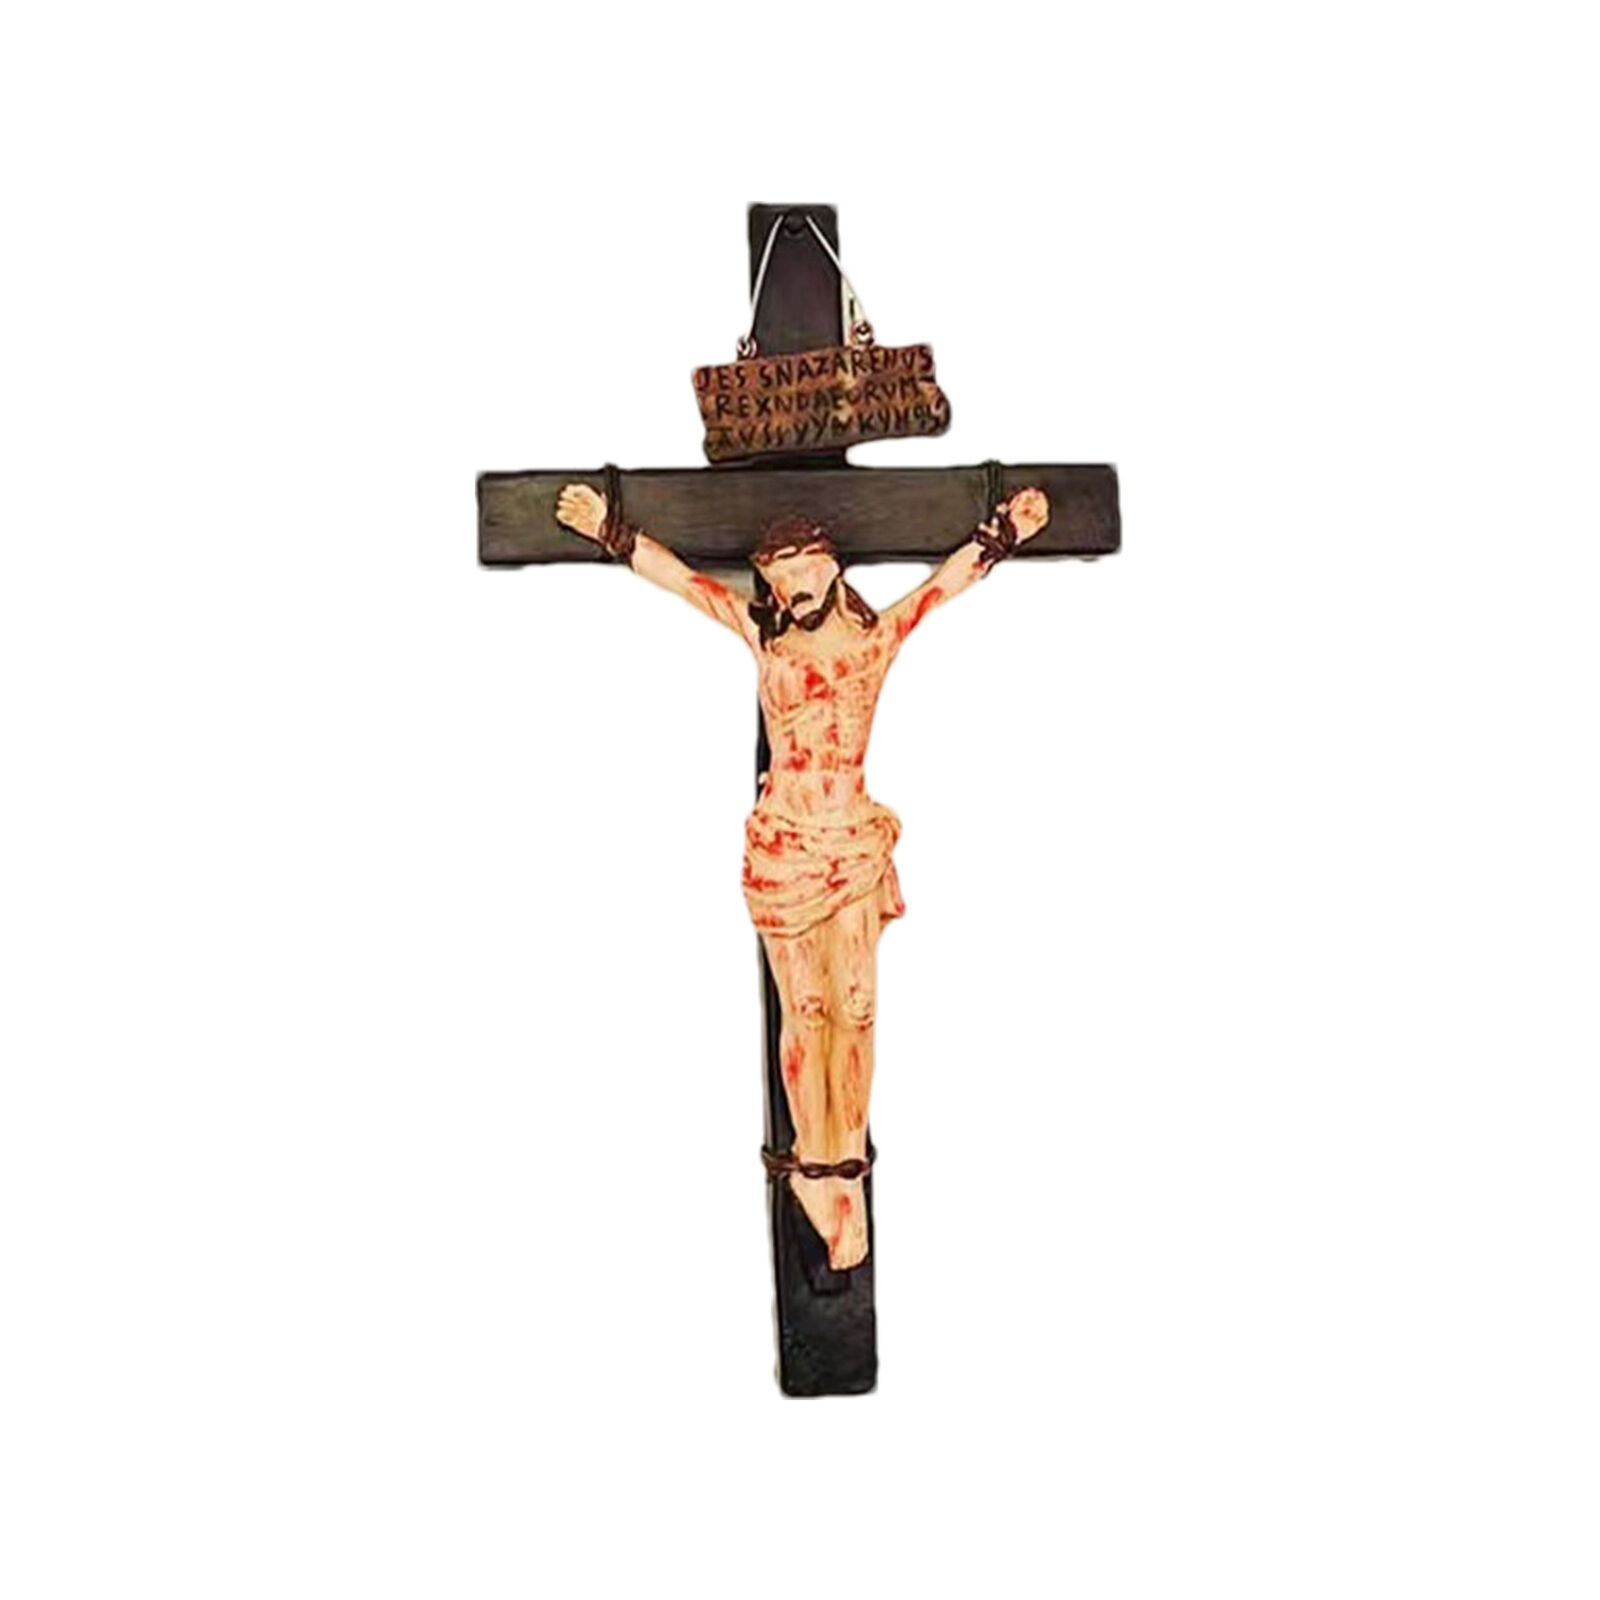 Realistic Crucifix Jesus Christ statue Christ Wound for Meditation Wall Cross